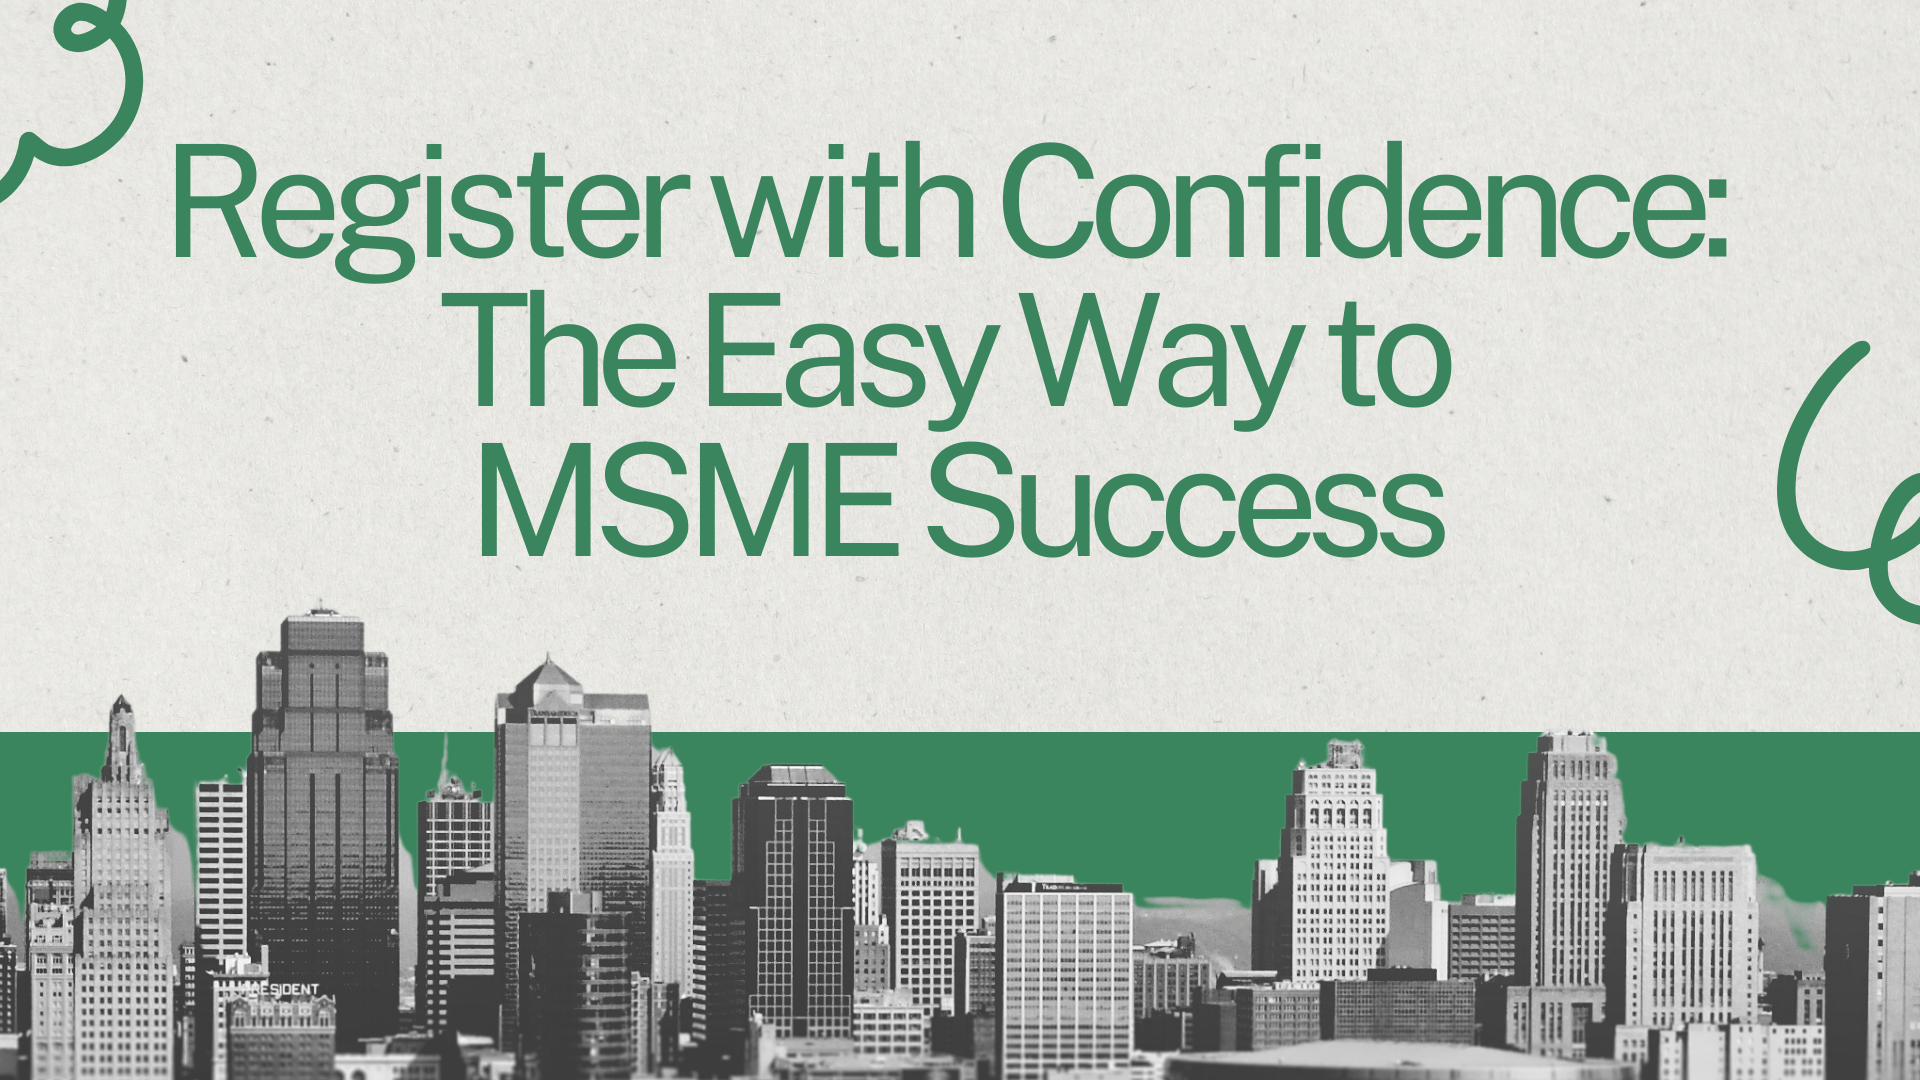 Register with Confidence: The Easy Way to MSME Success